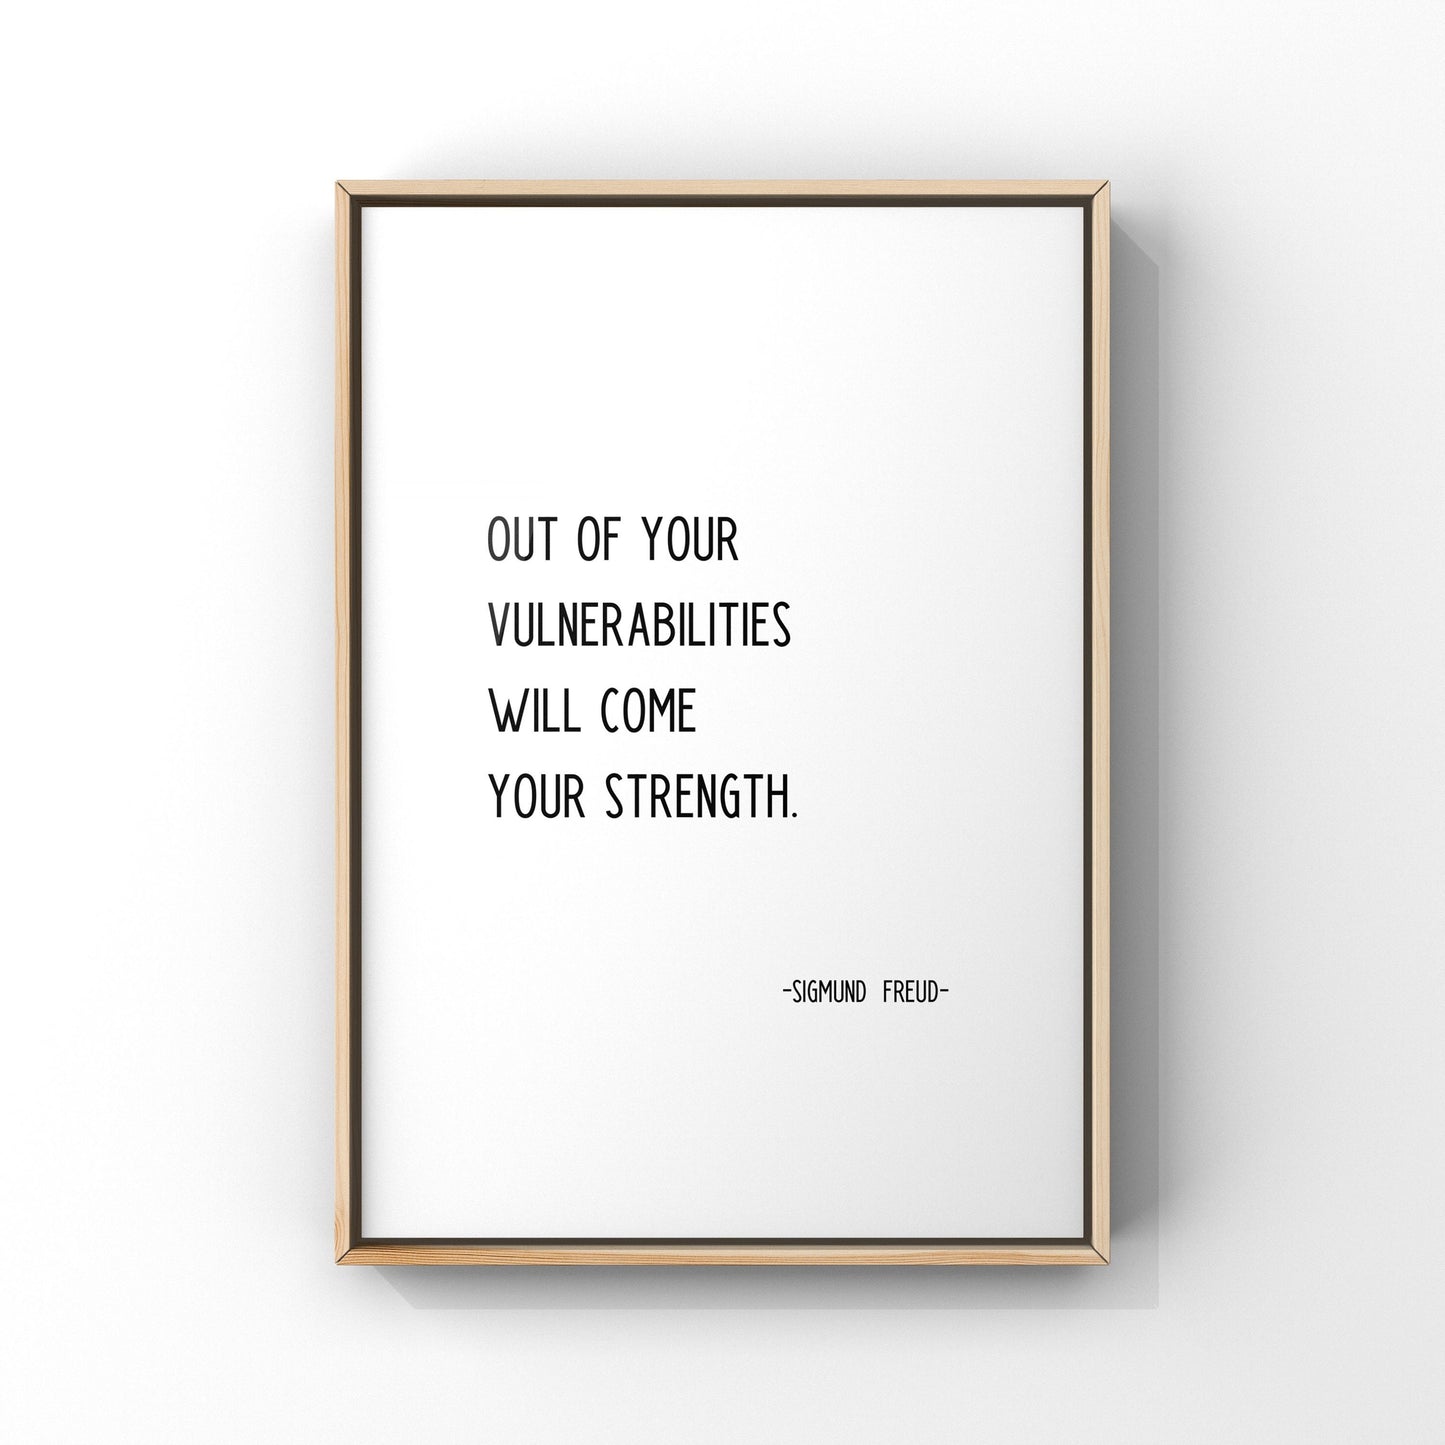 Out of your vulnerabilities will come your strength, Sigmund Freud quote, Inspirational quote print,Motivational saying,Encouragement gift